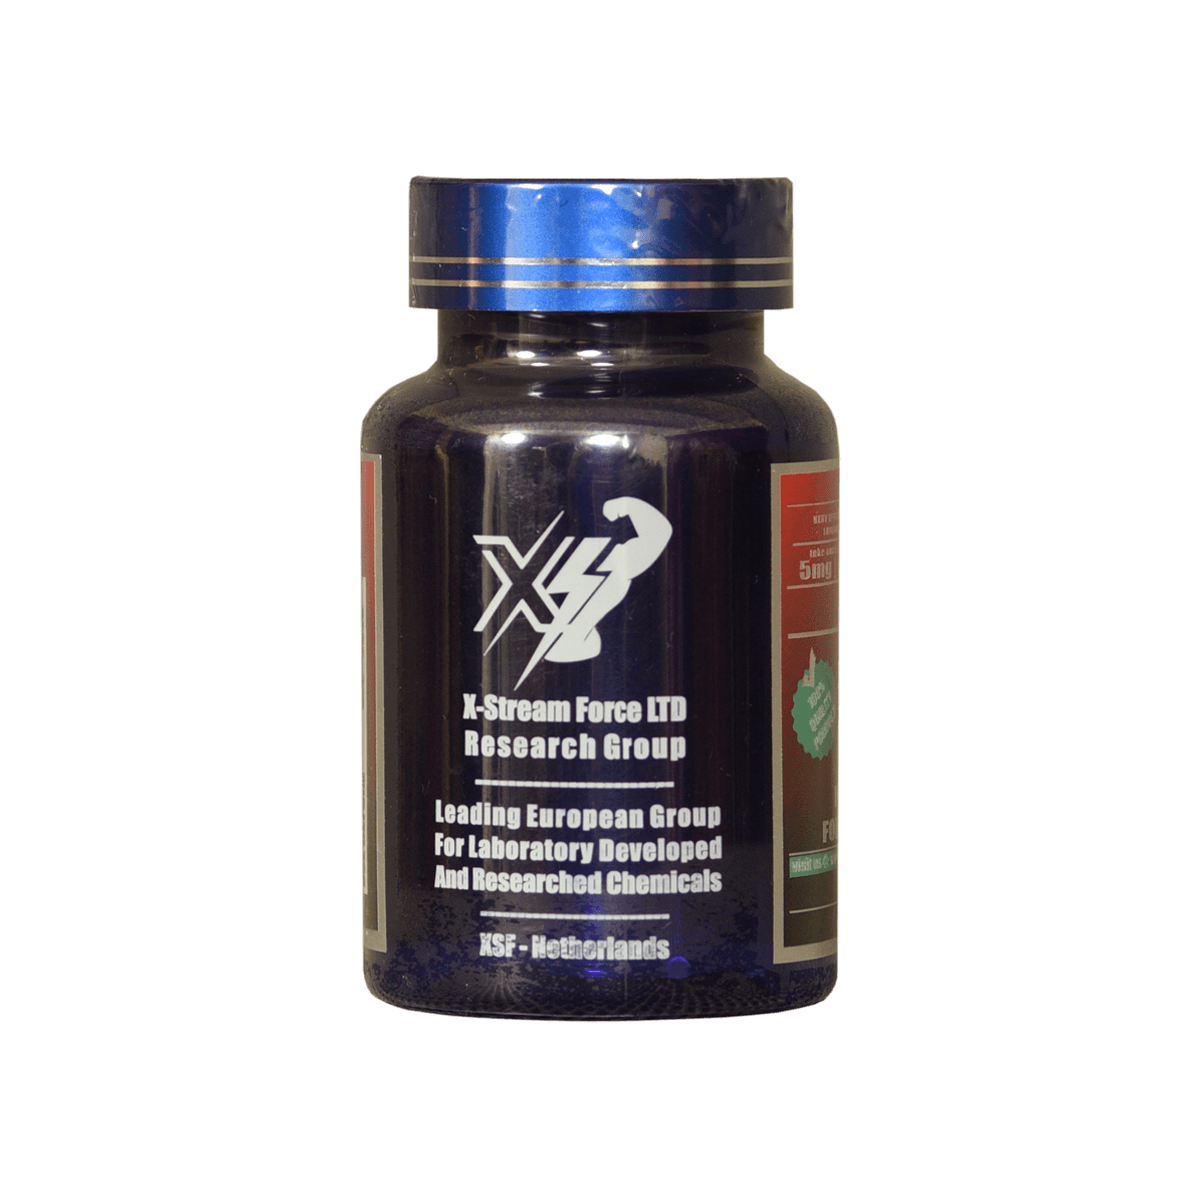 ligandrol-lgd4033-capsules-90-5mg-muscle shop-xstreamforce-for muscle mass-strength-volume-dramatic gains, buy online✦lgd4033 sarms✦ fitness supplements-muscle-hunter